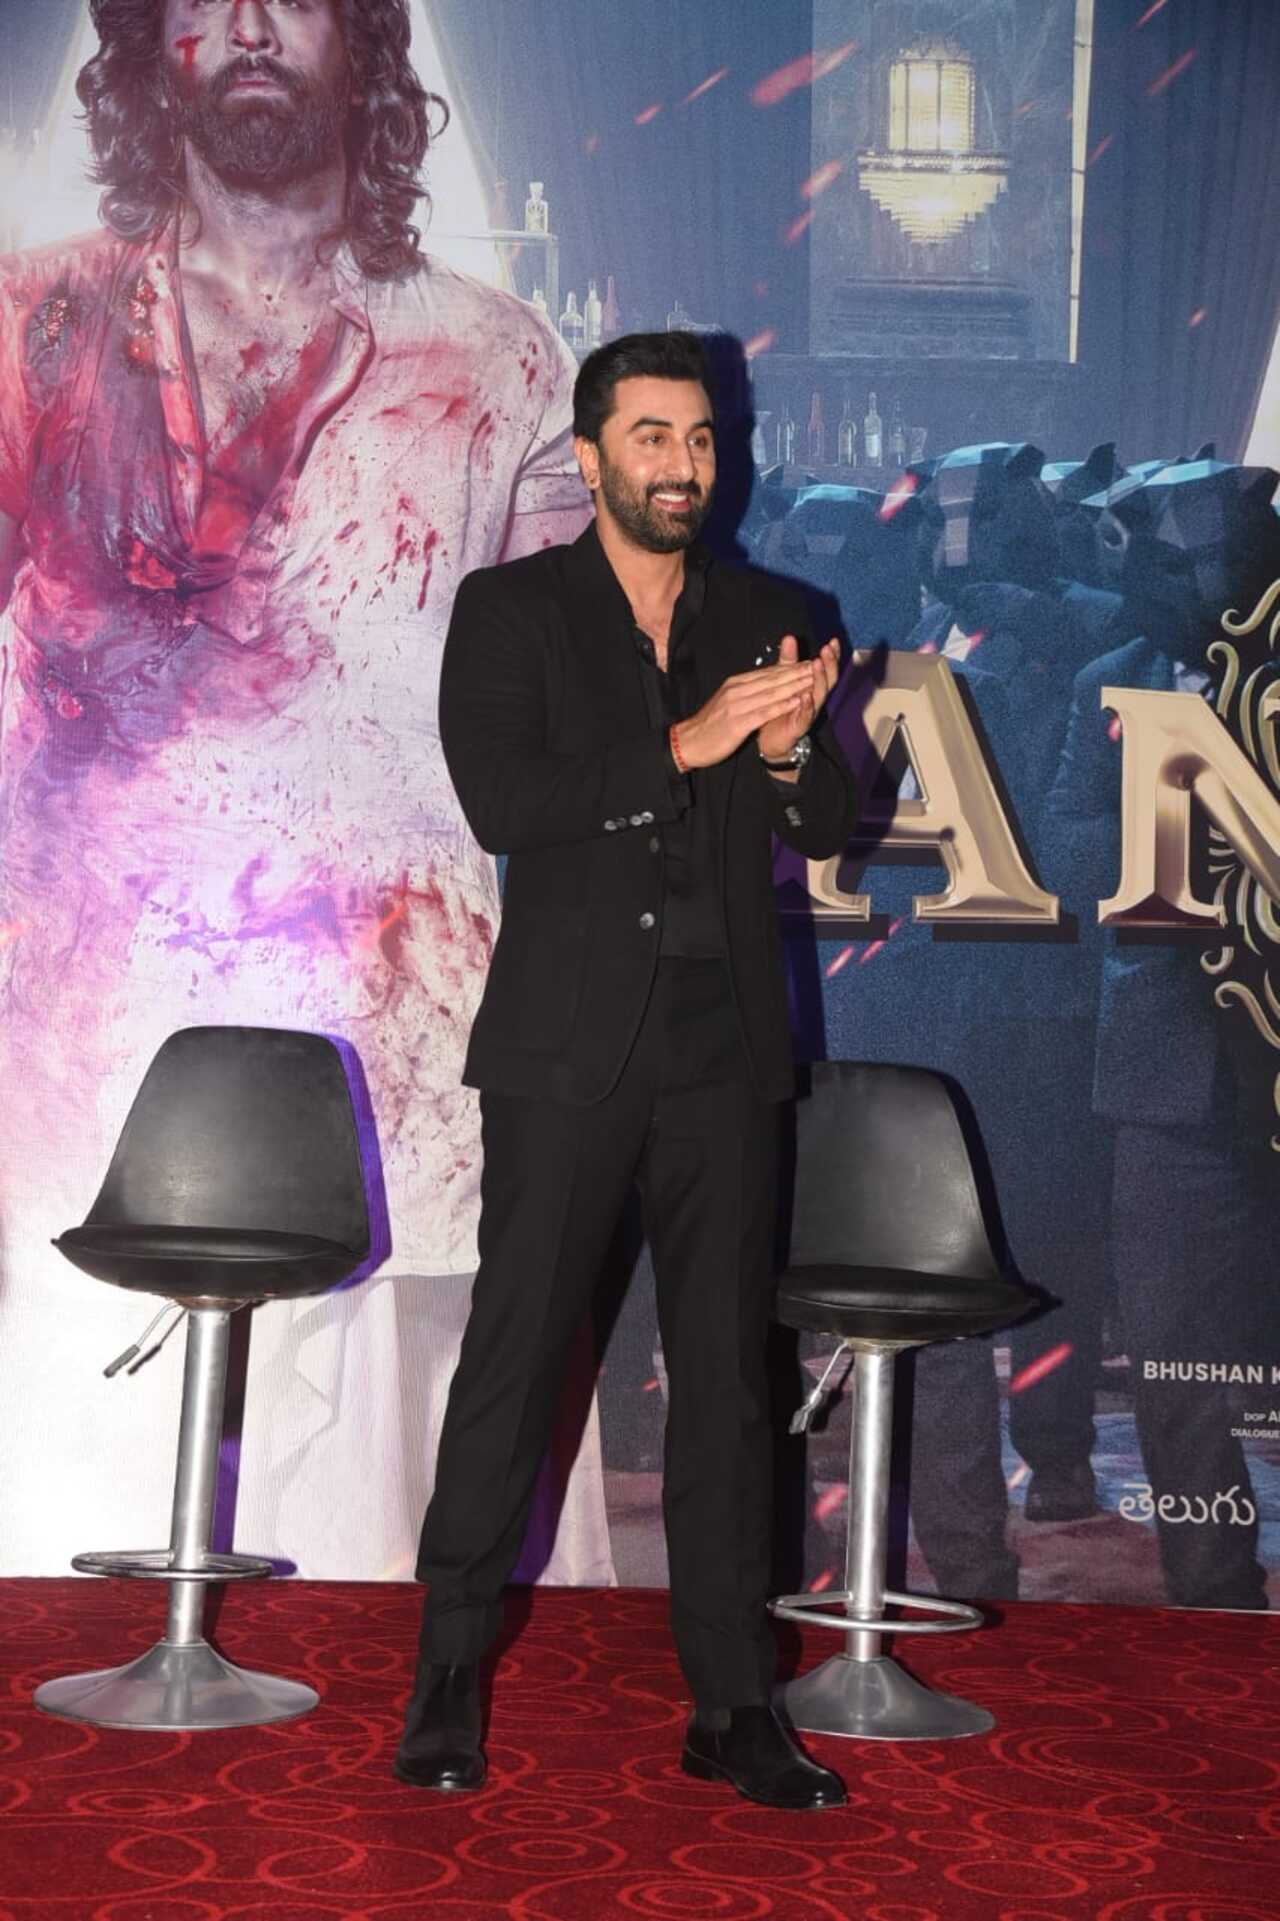 Ranbir plays the role of a man who will go to any extent to seek his father's validation. Talking about the same, the actor said at the launch, “I think eventually, subconsciously kahin na kahin mujhe mere papa ki yaad aayi. I think jis tareeke se voh baat karte the, he was a very passionate and aggressive man (Subconsciously, I thought of my father. The way he used to speak, he was a very passionate and aggressive man)”